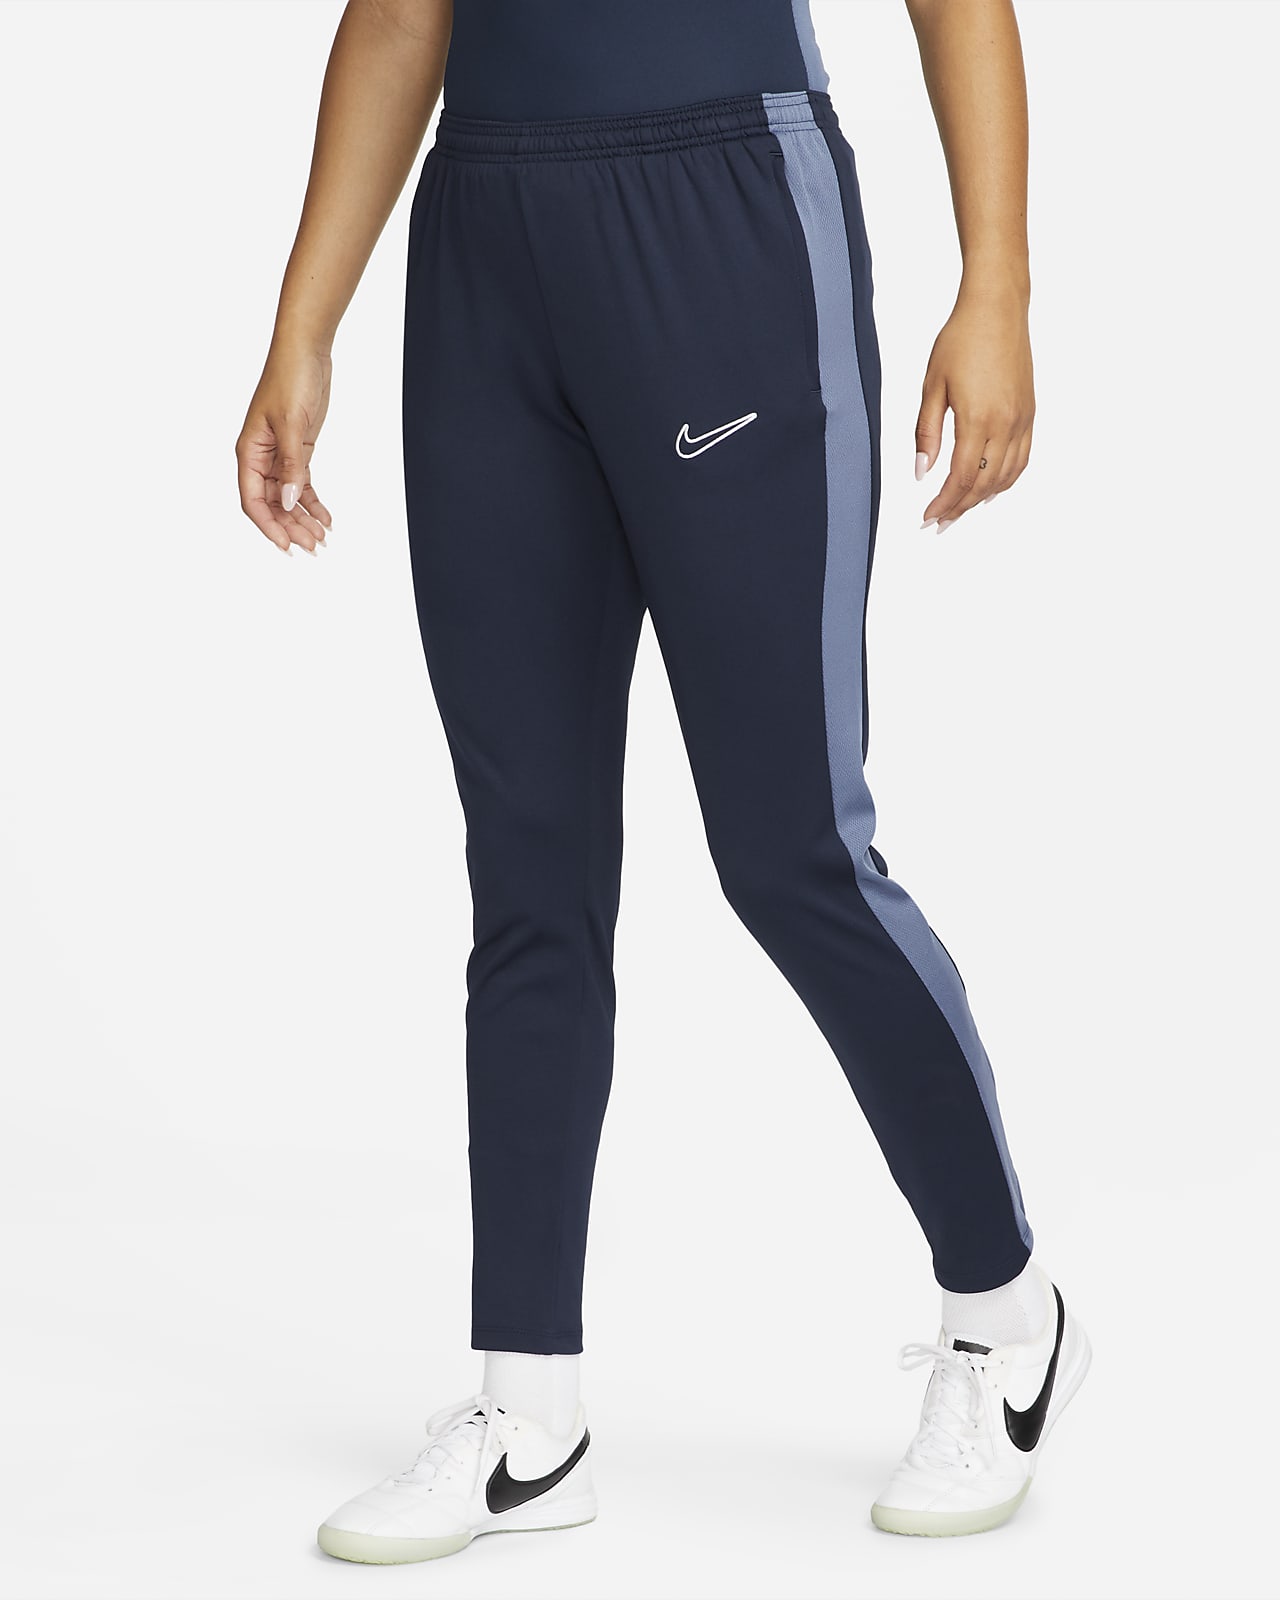 What to Wear to Yoga. Nike.com